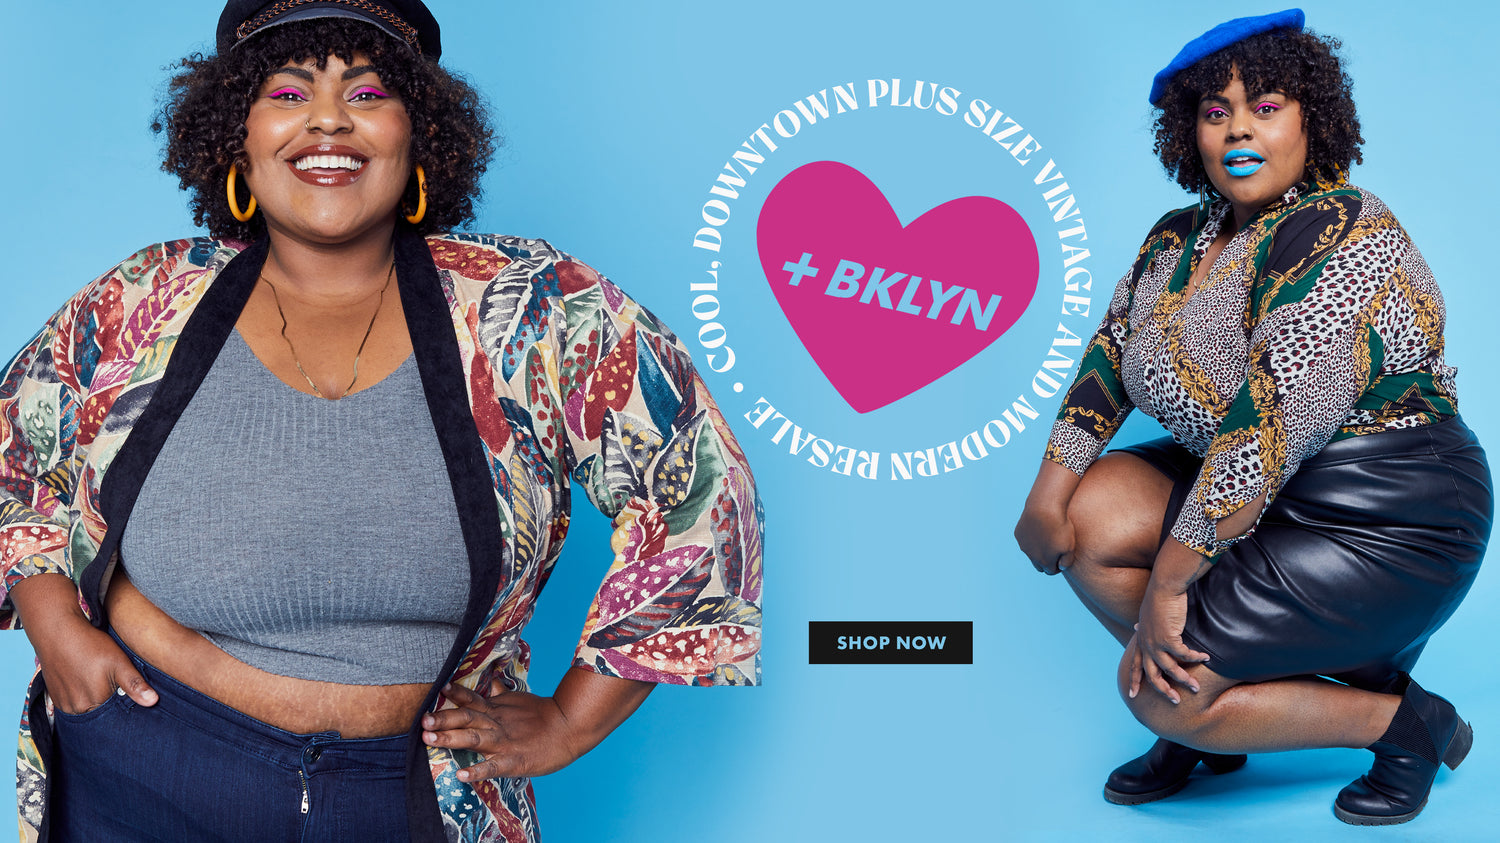 Cool downtown clothes for sizes 1X – Plus BKLYN